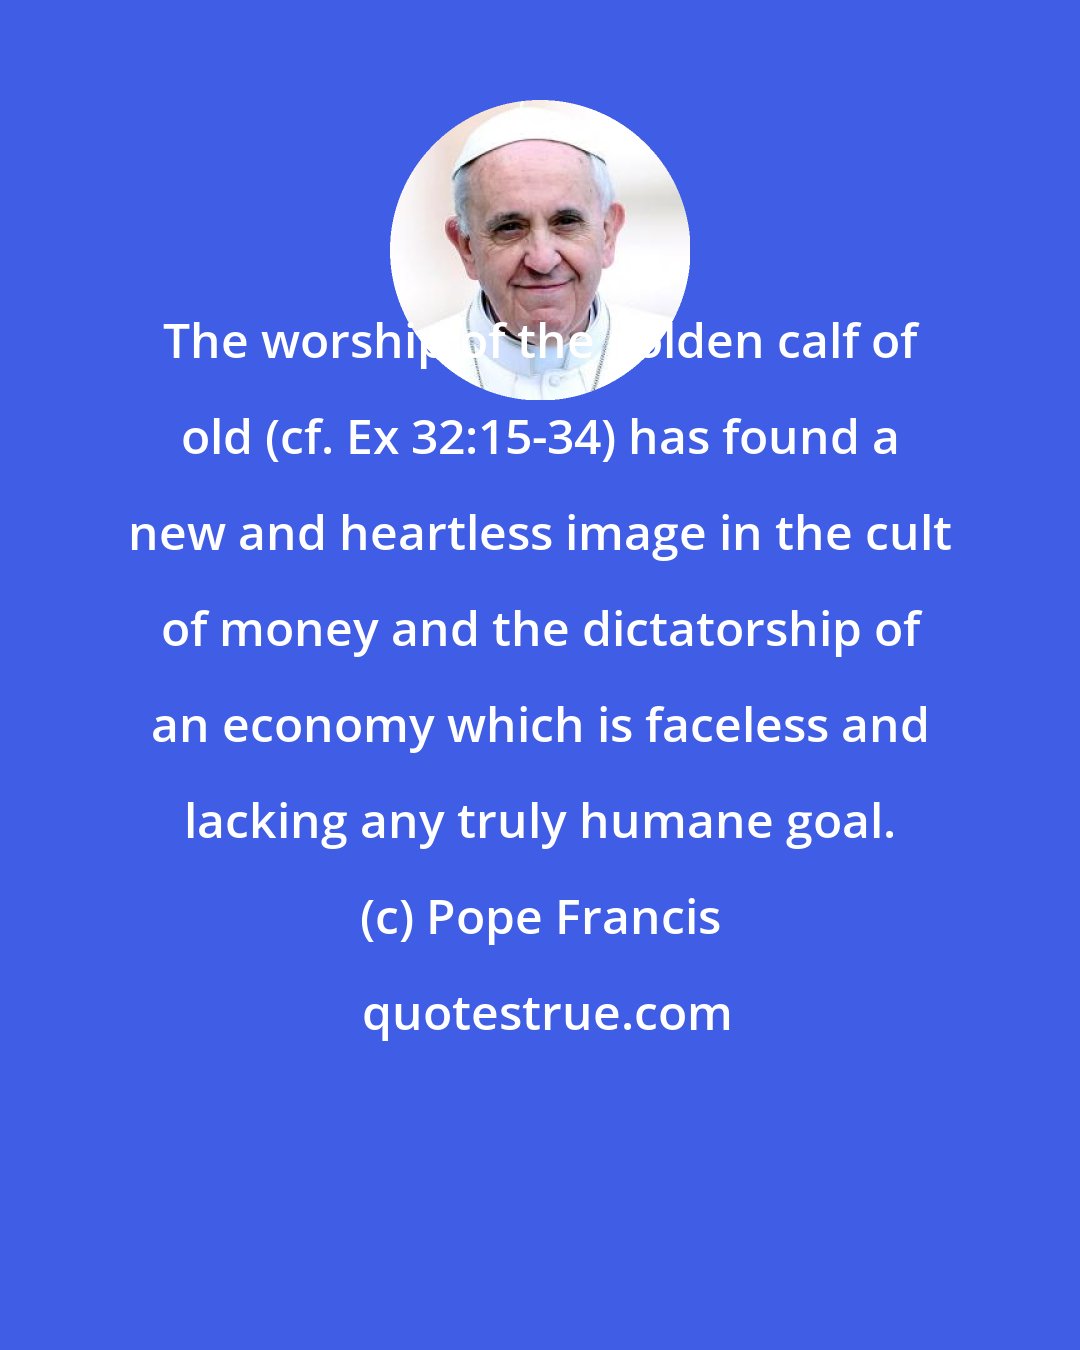 Pope Francis: The worship of the golden calf of old (cf. Ex 32:15-34) has found a new and heartless image in the cult of money and the dictatorship of an economy which is faceless and lacking any truly humane goal.